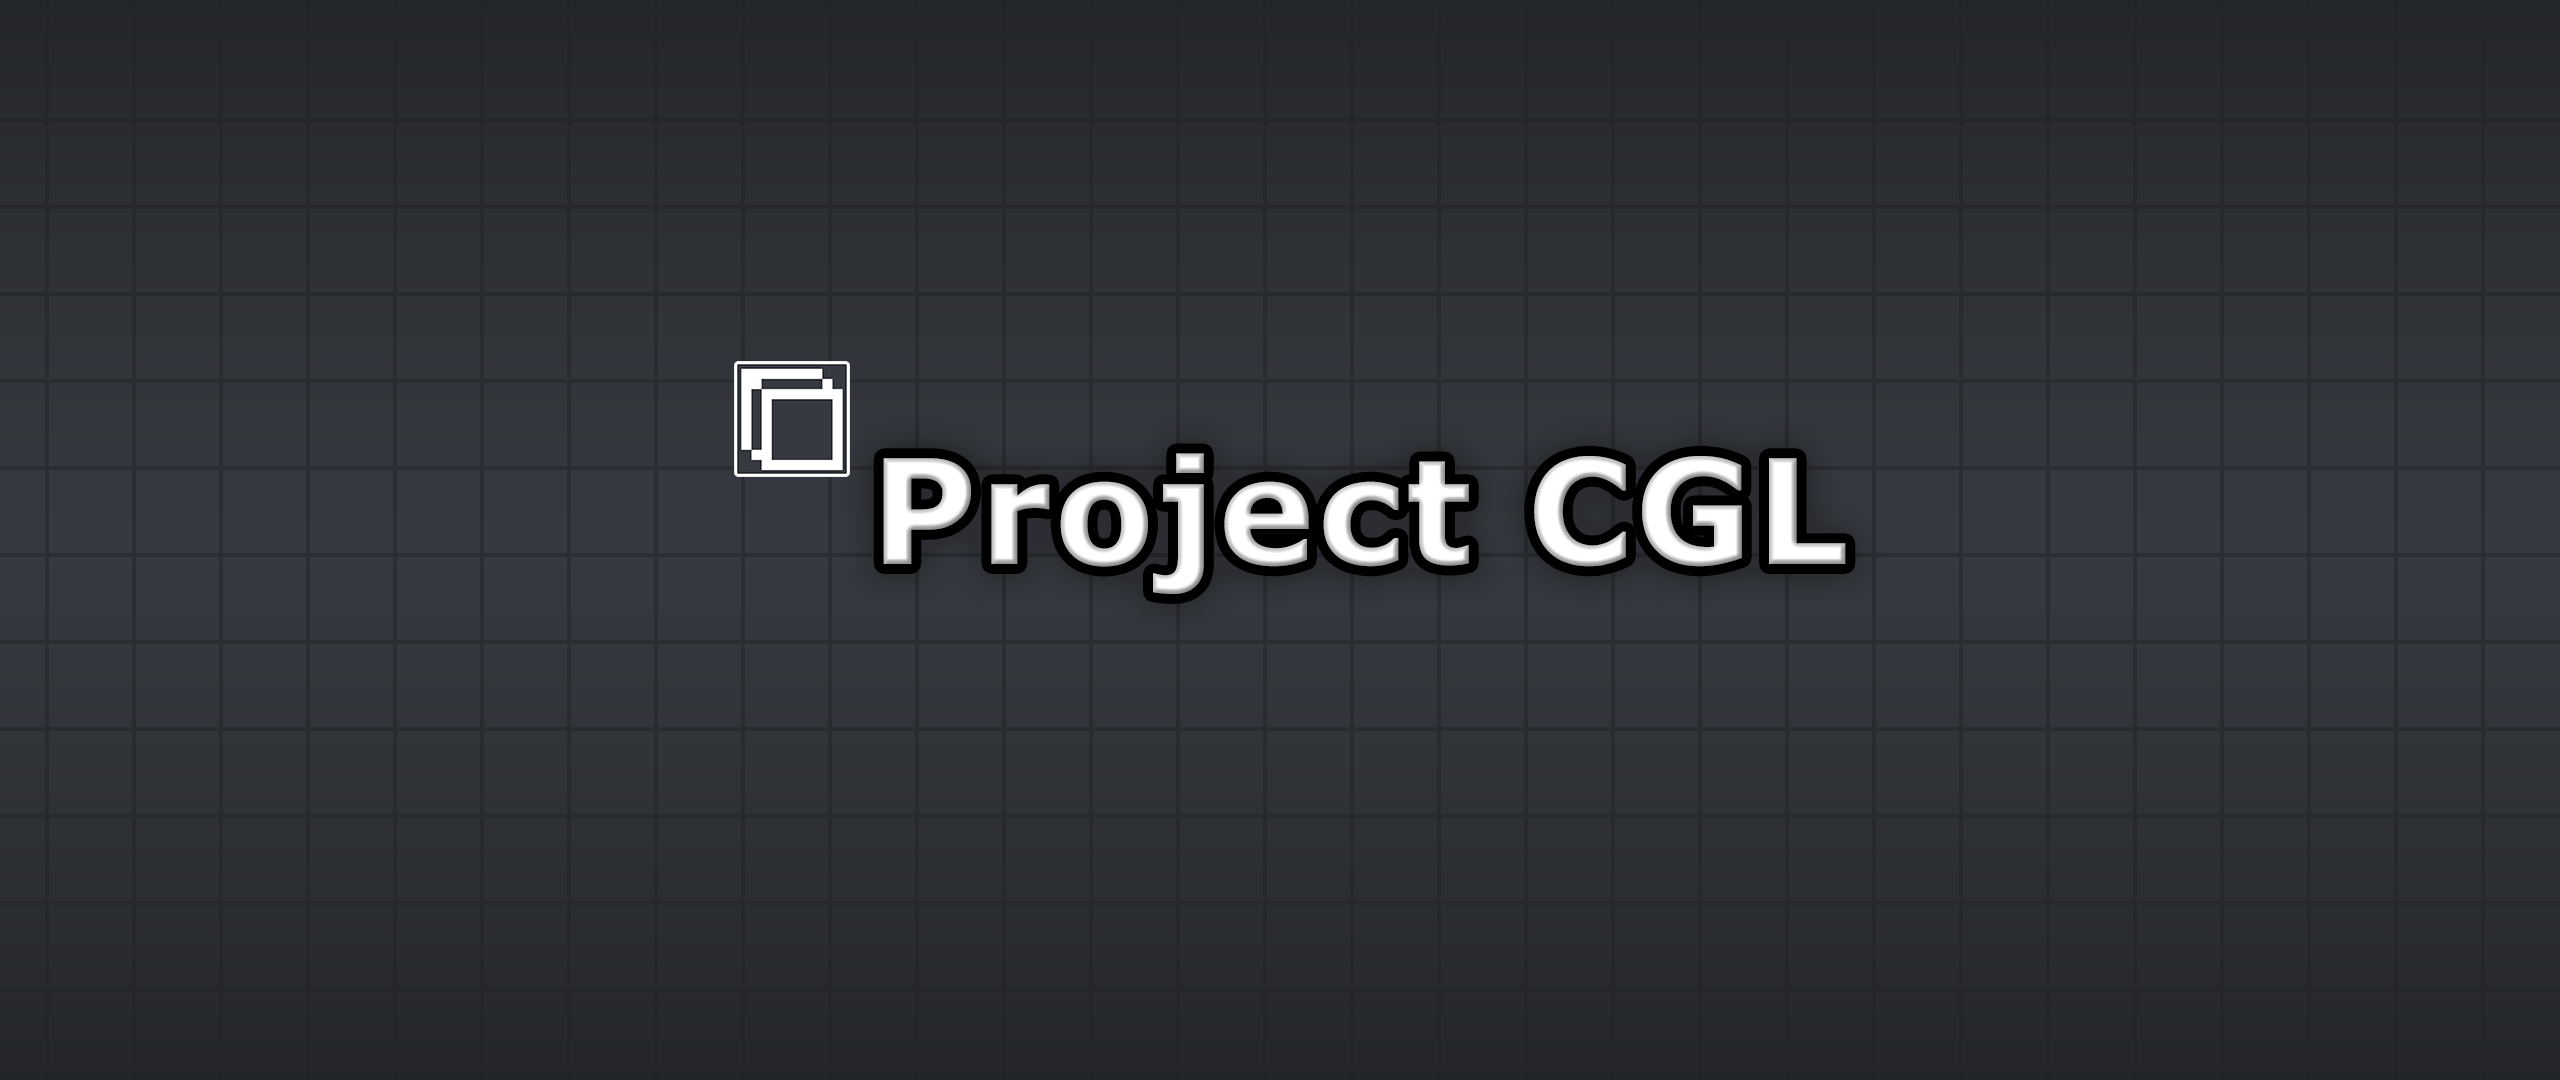 Project CGL | Conway's Game of Life - Simulator by Michael West